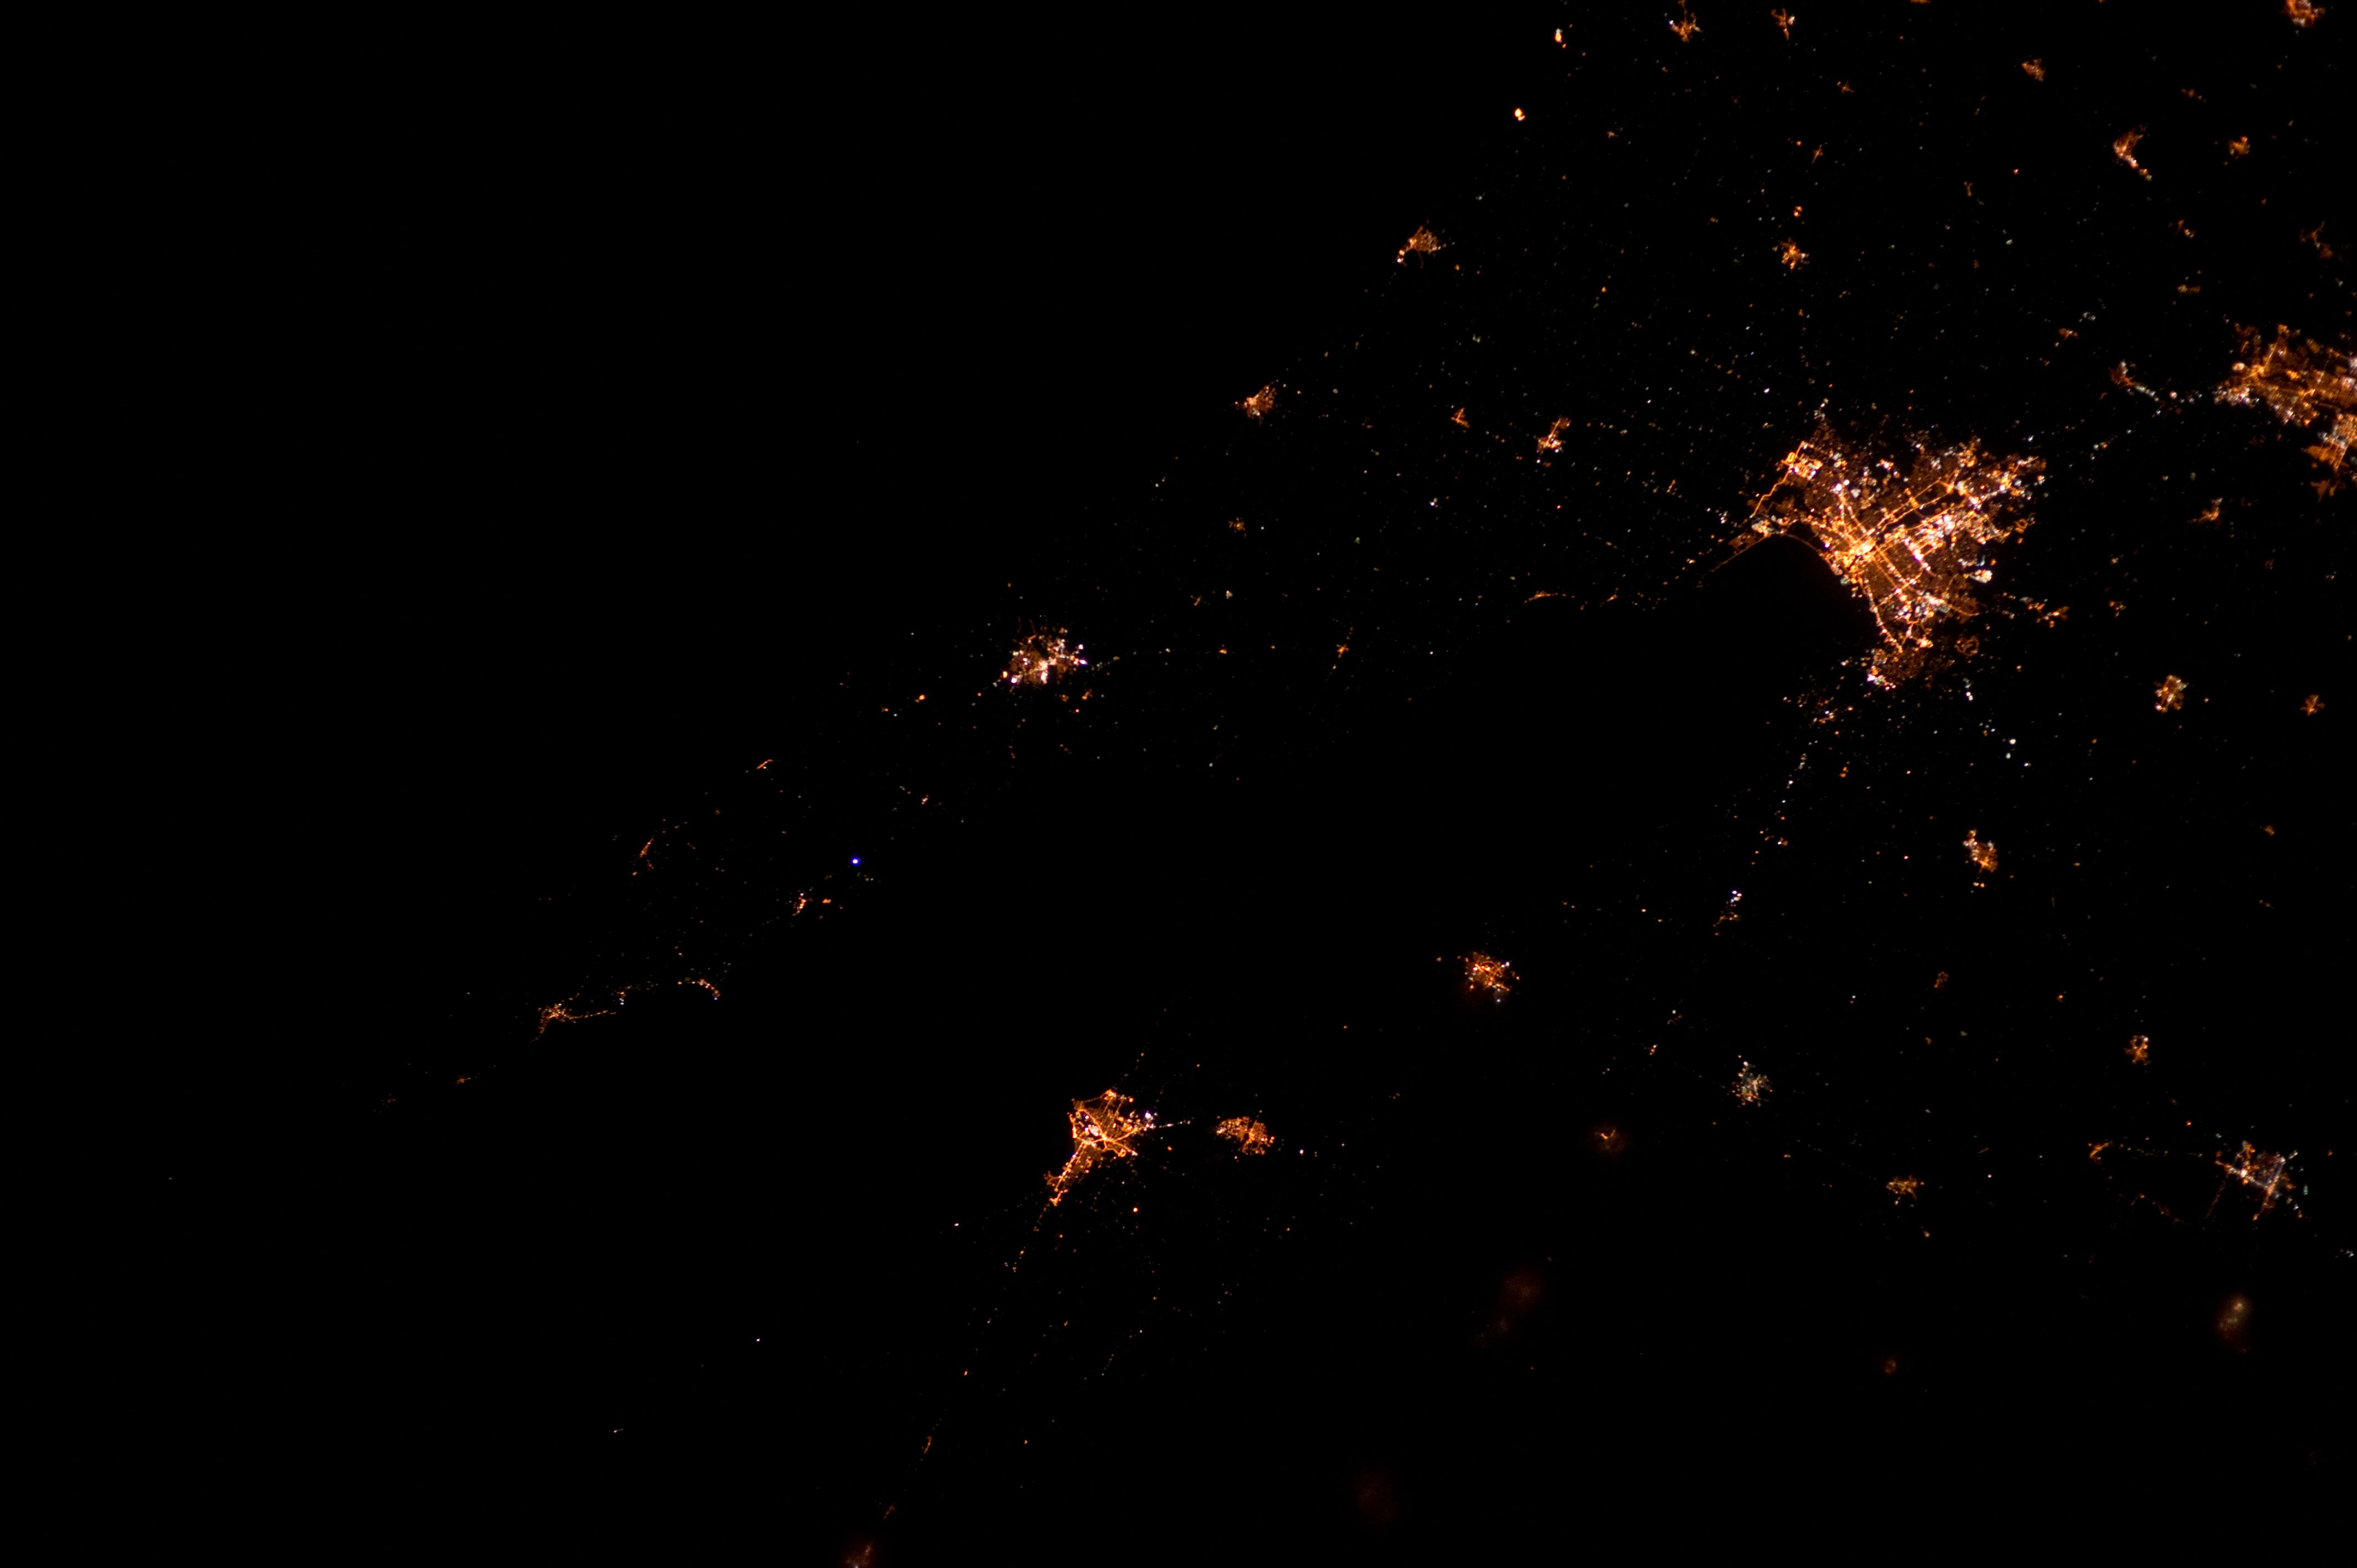 A portion of the metro area, taken 1:10 AM CDT, March 27, 2012 during Expedition 30 of the ISS